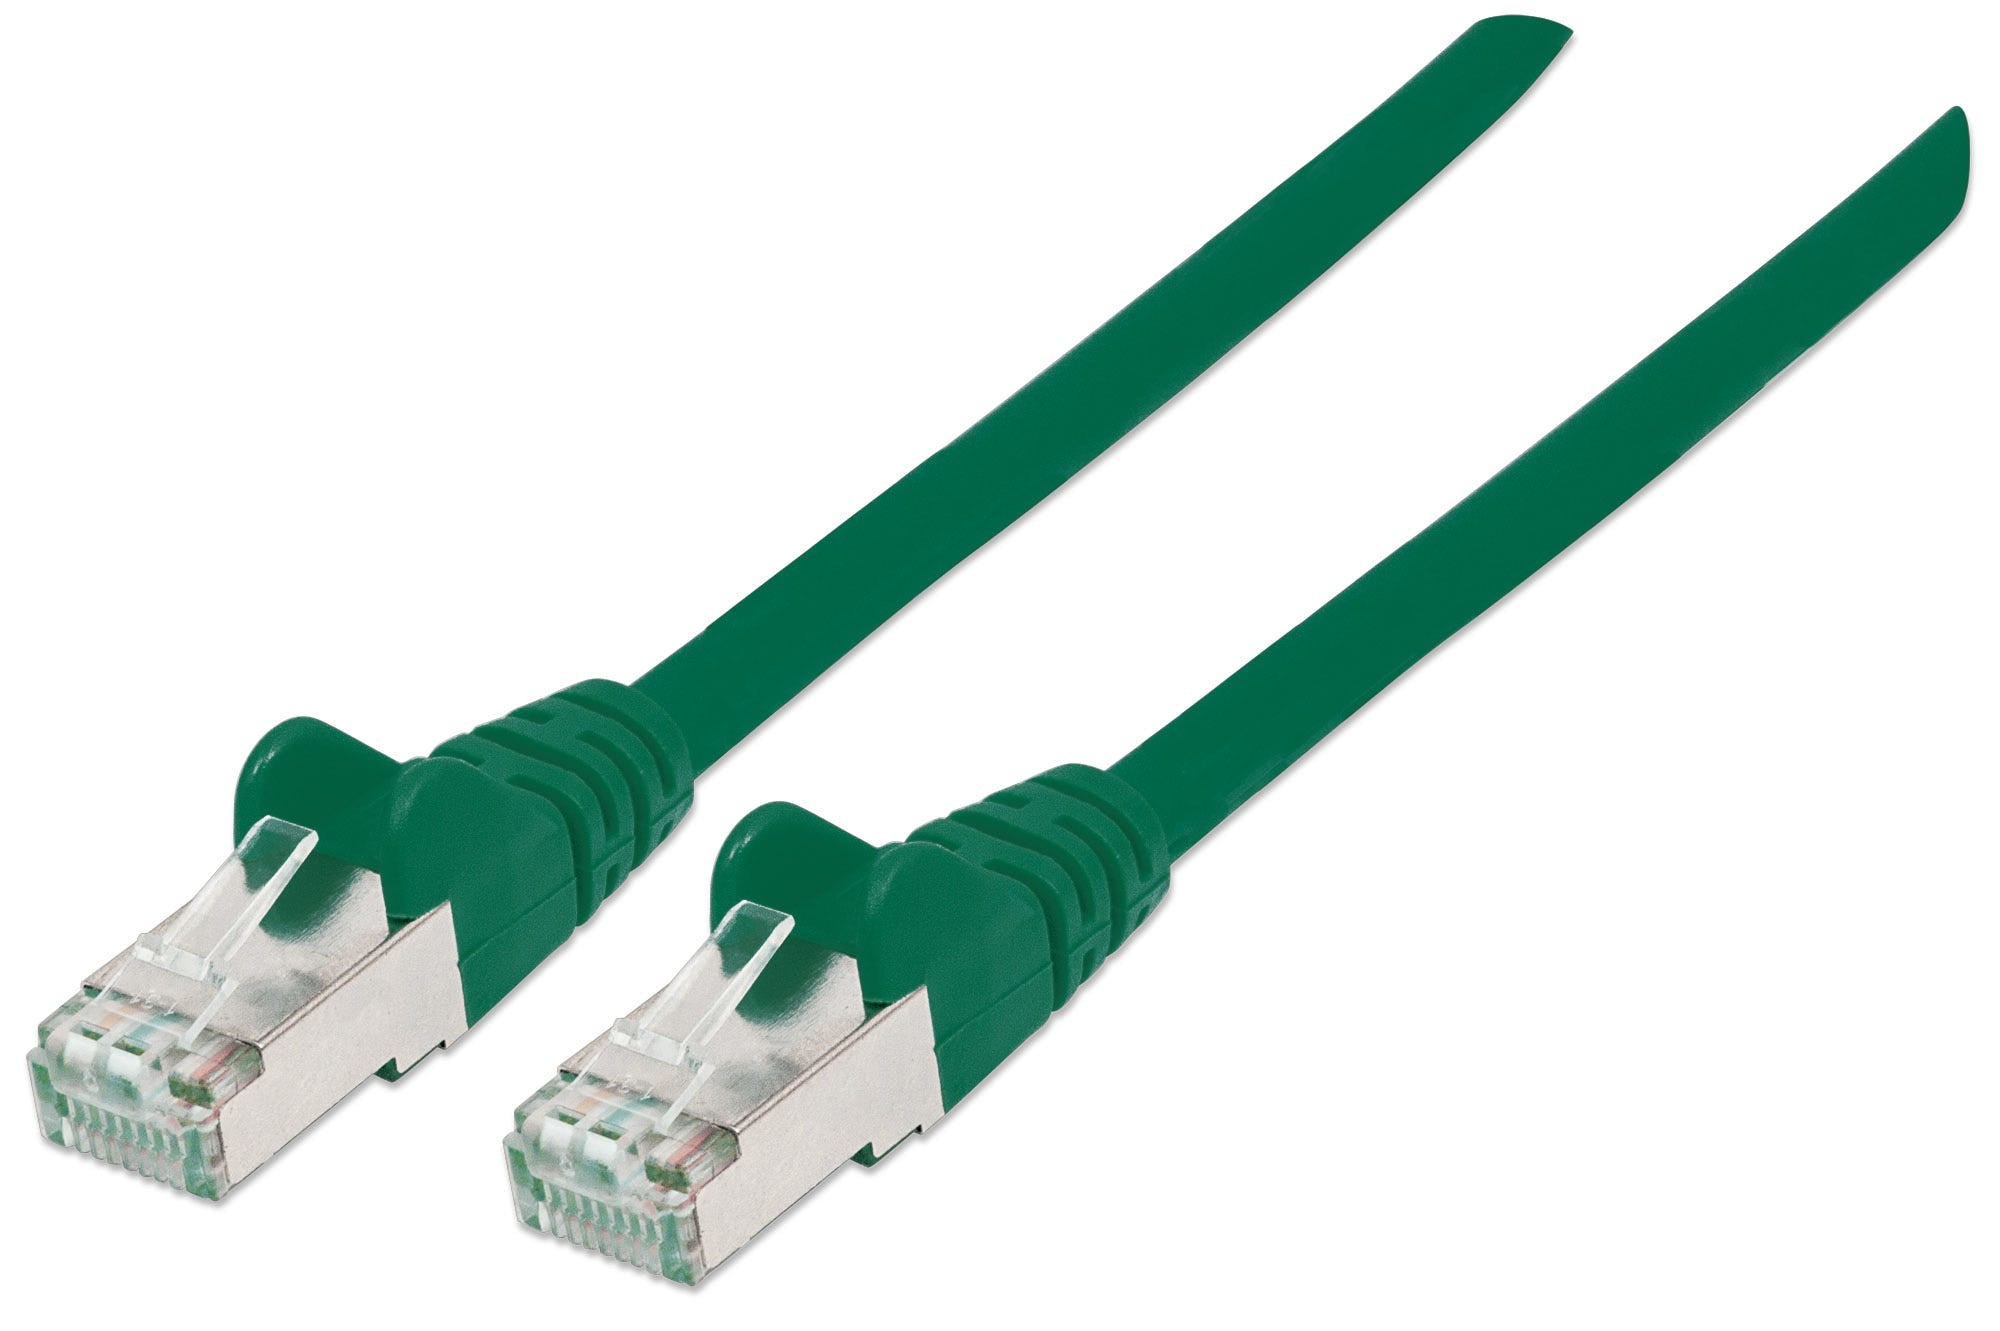 Intellinet Network Patch Cable, Cat6A, 5m, Green, Copper, S/FTP, LSOH / LSZH, PVC, RJ45, Gold Plated Contacts, Snagless, Booted, Lifetime Warranty, Polybag